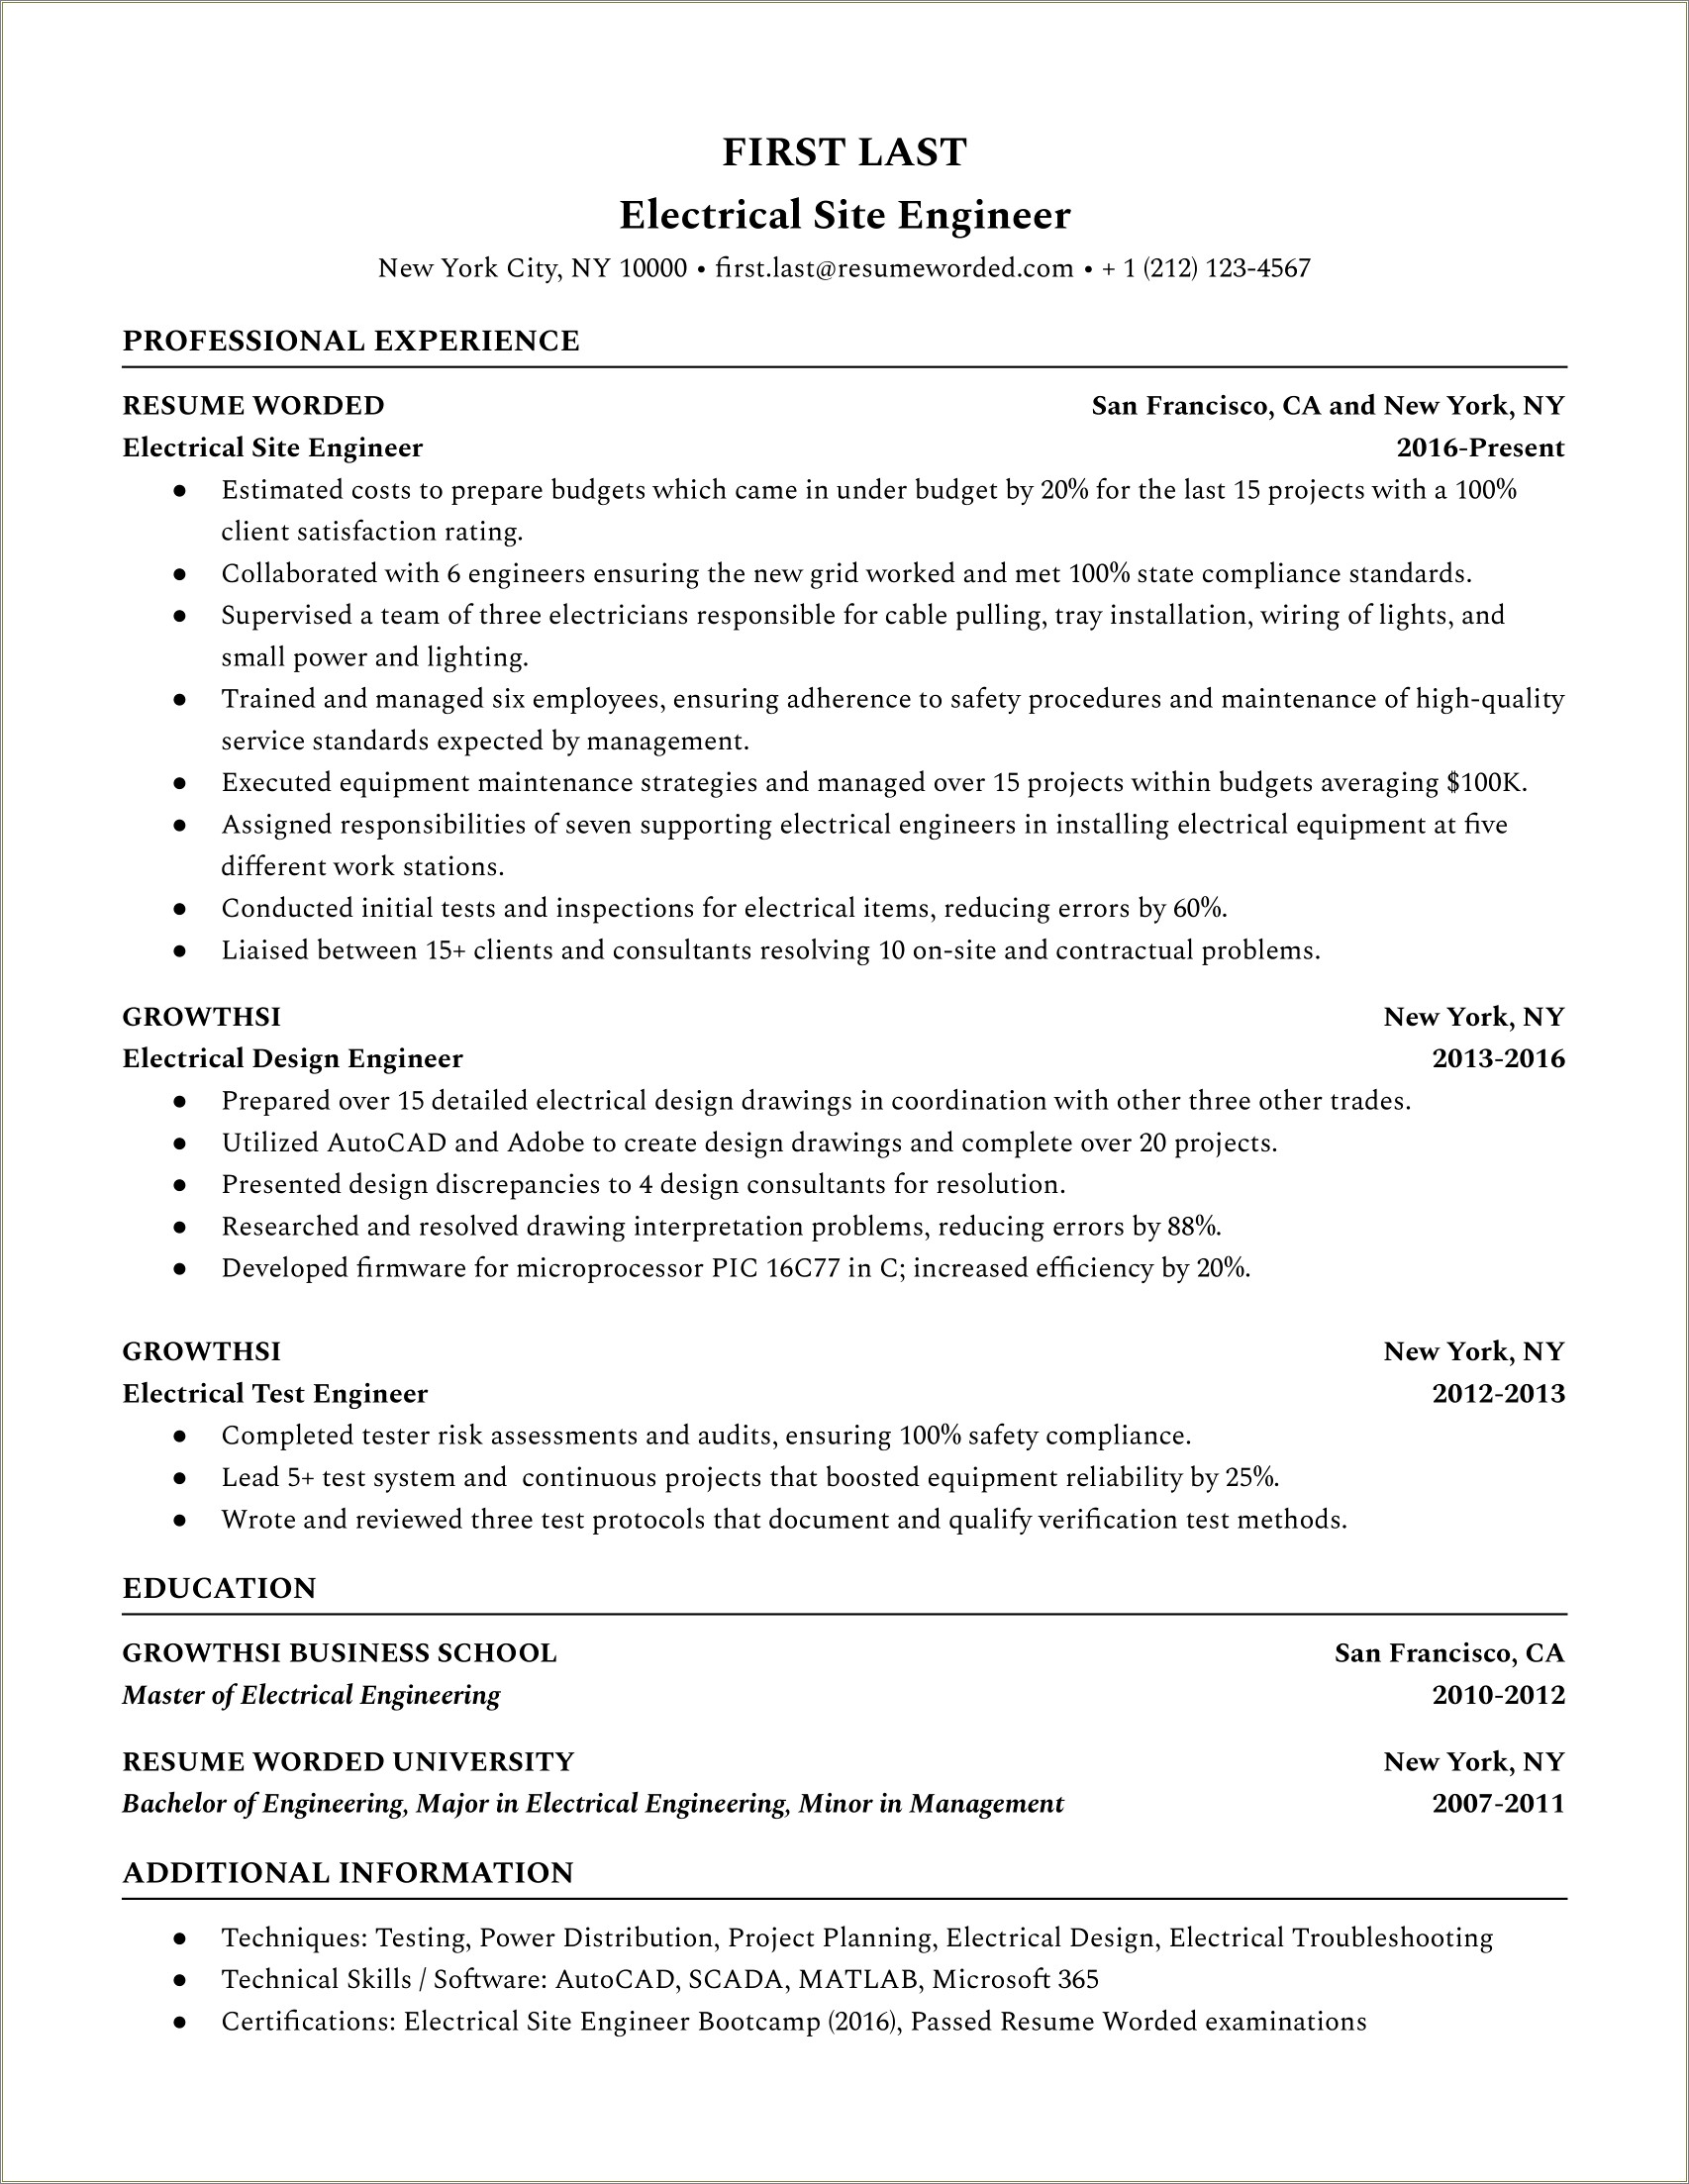 Work Experience Or Engineering Projects First On Resume